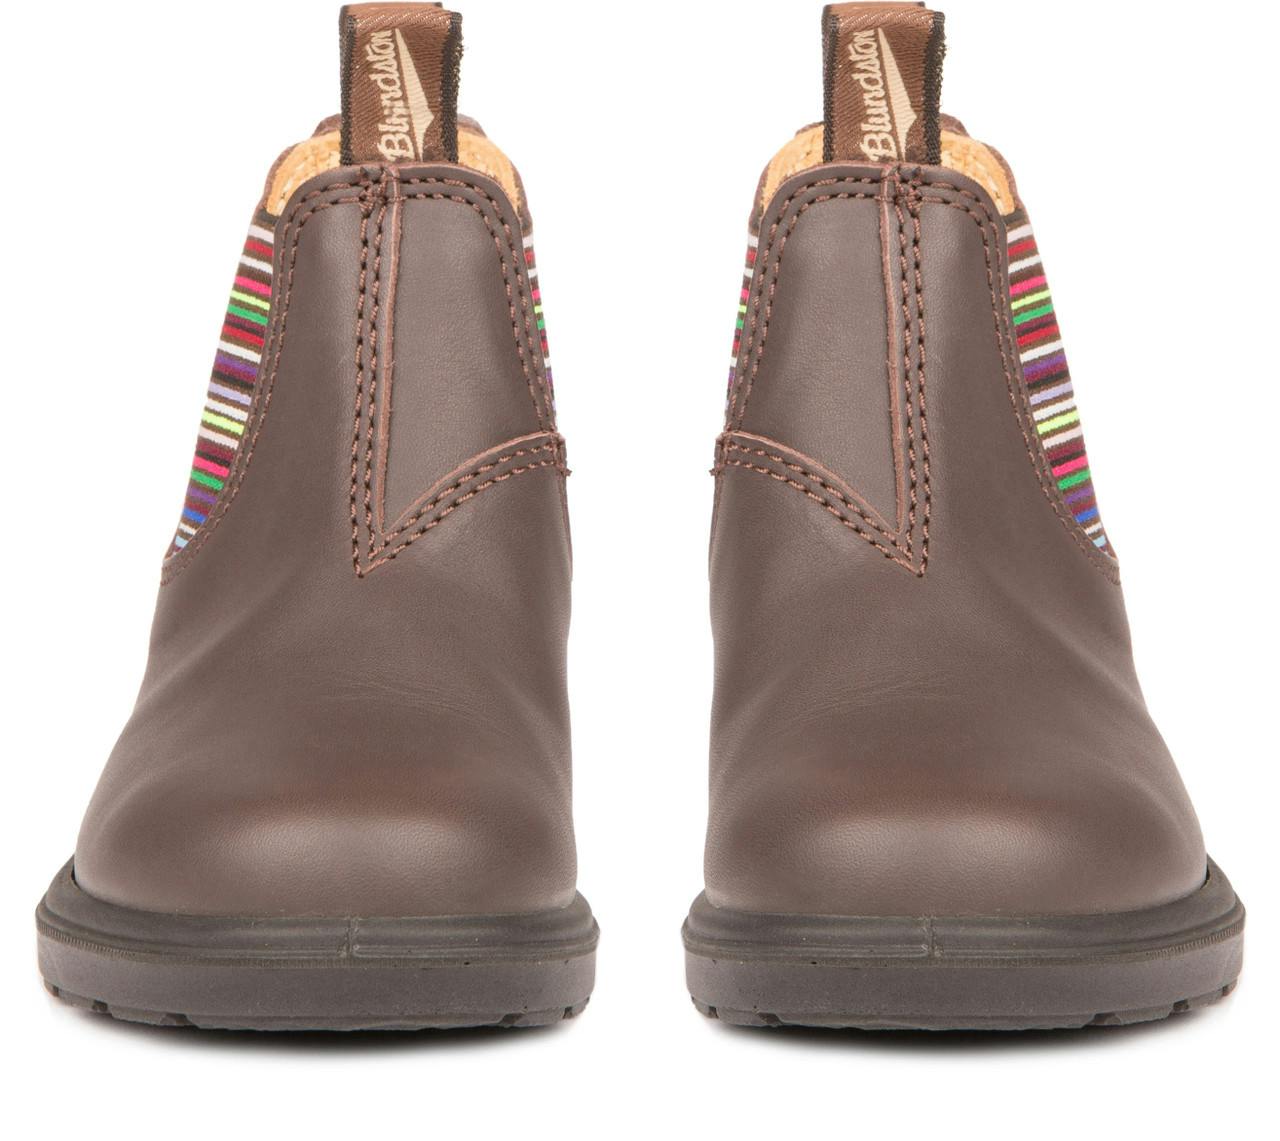 1413 Kid's Boots Brown with Stripes